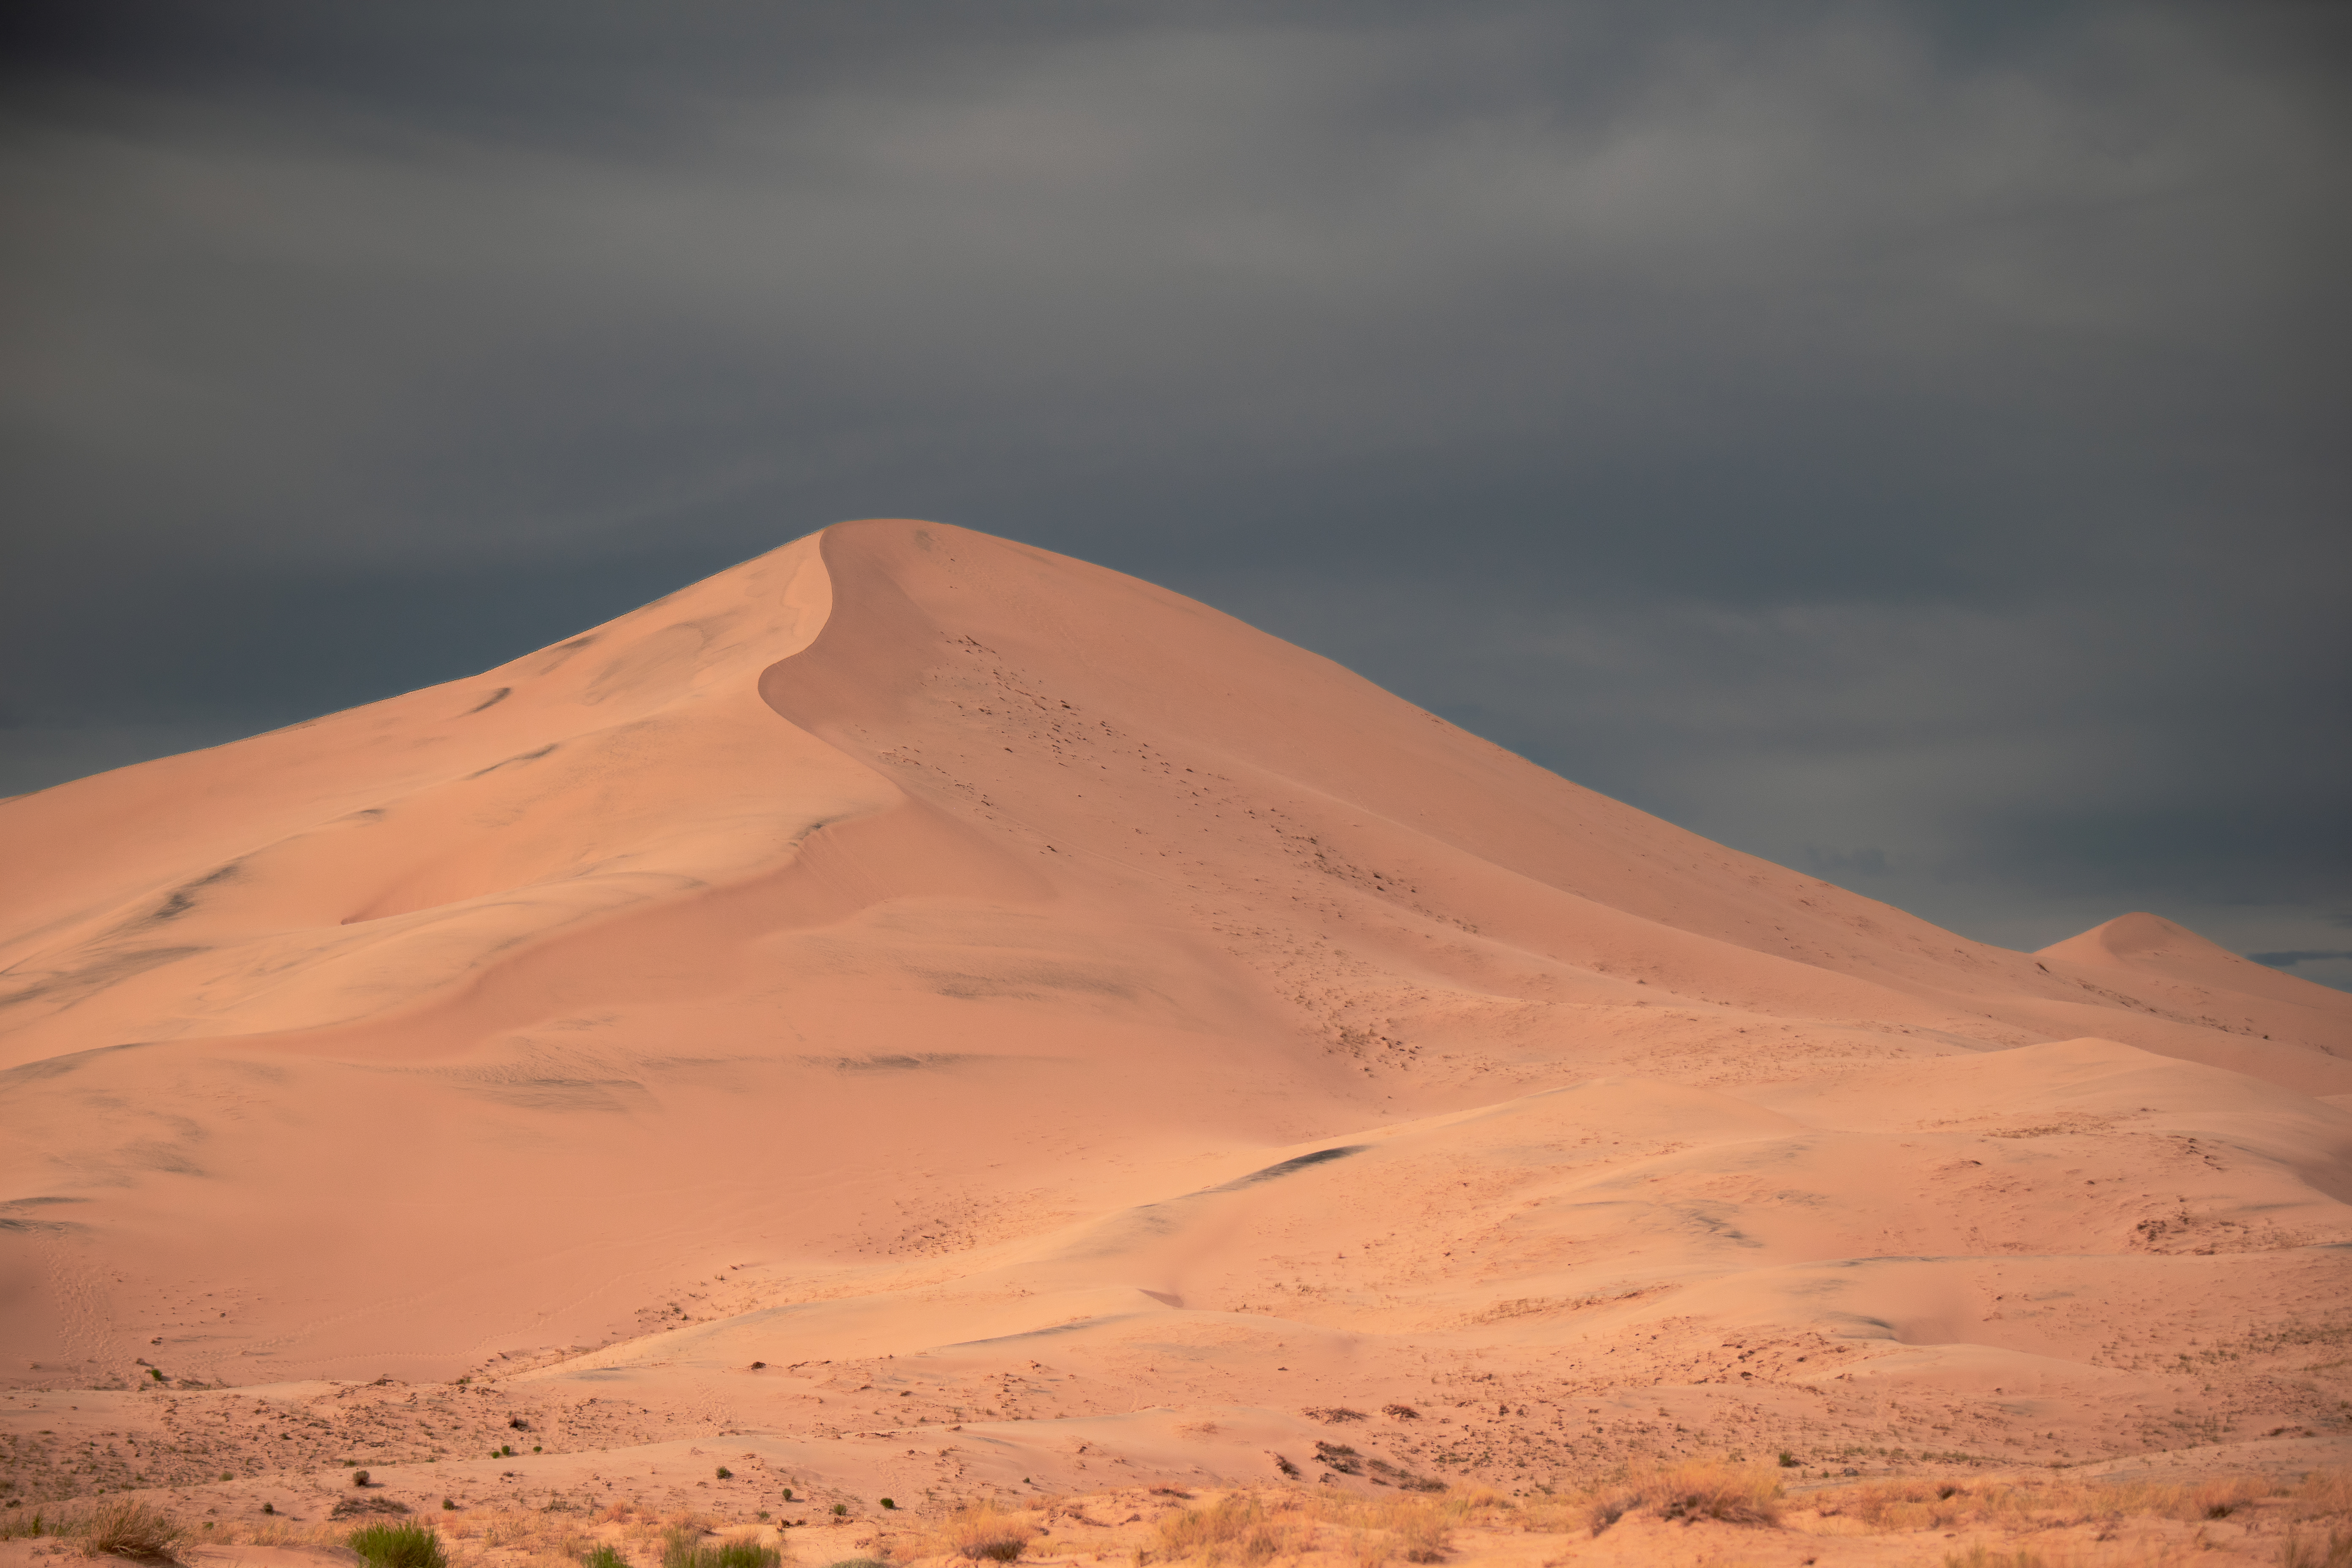 A sking large sand dune stands out against a cloudy sky